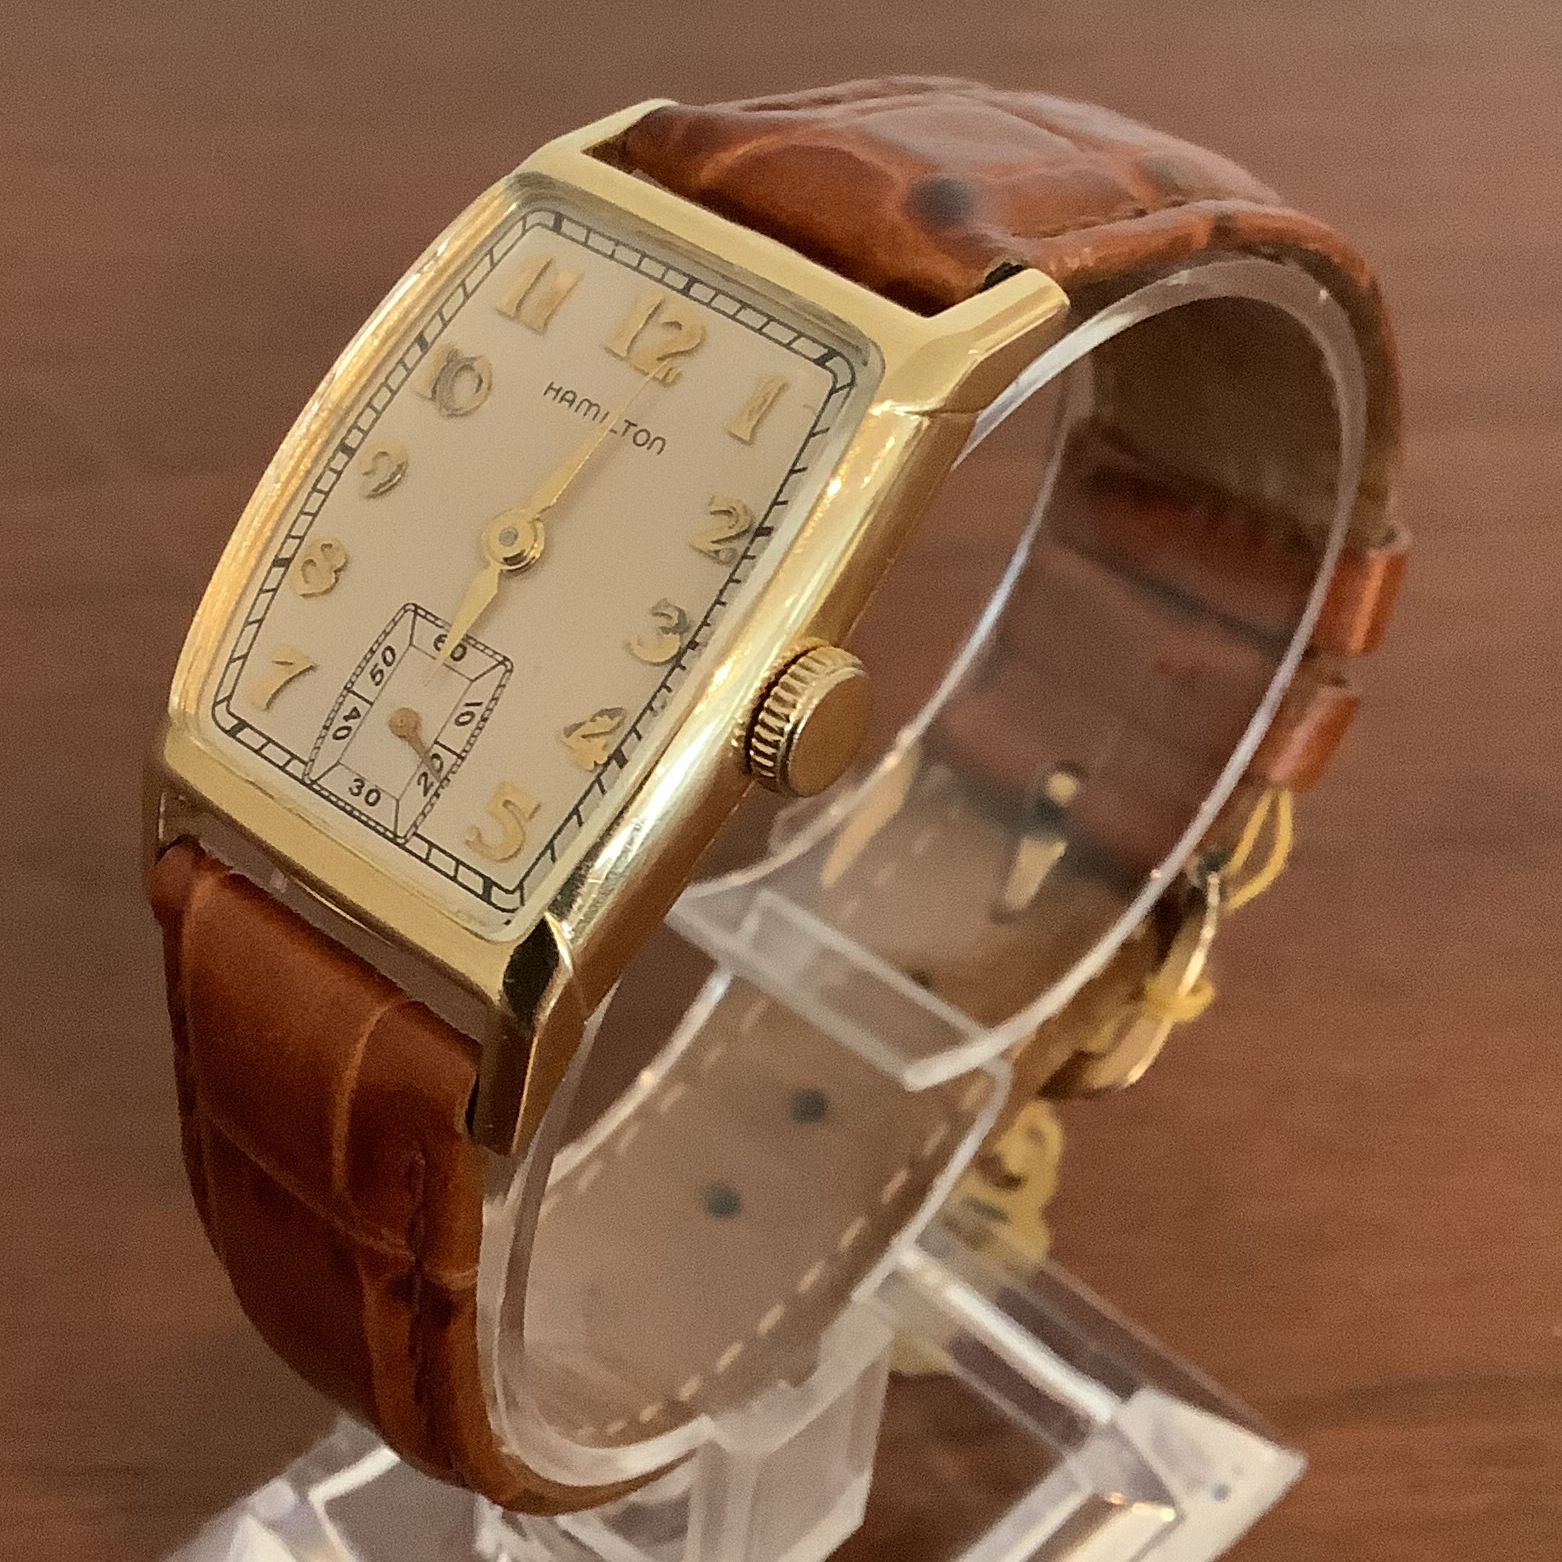 Hamilton cushion case wristwatch in 14 karat gold measuring 35 by 21 millimetres, with brown leather band